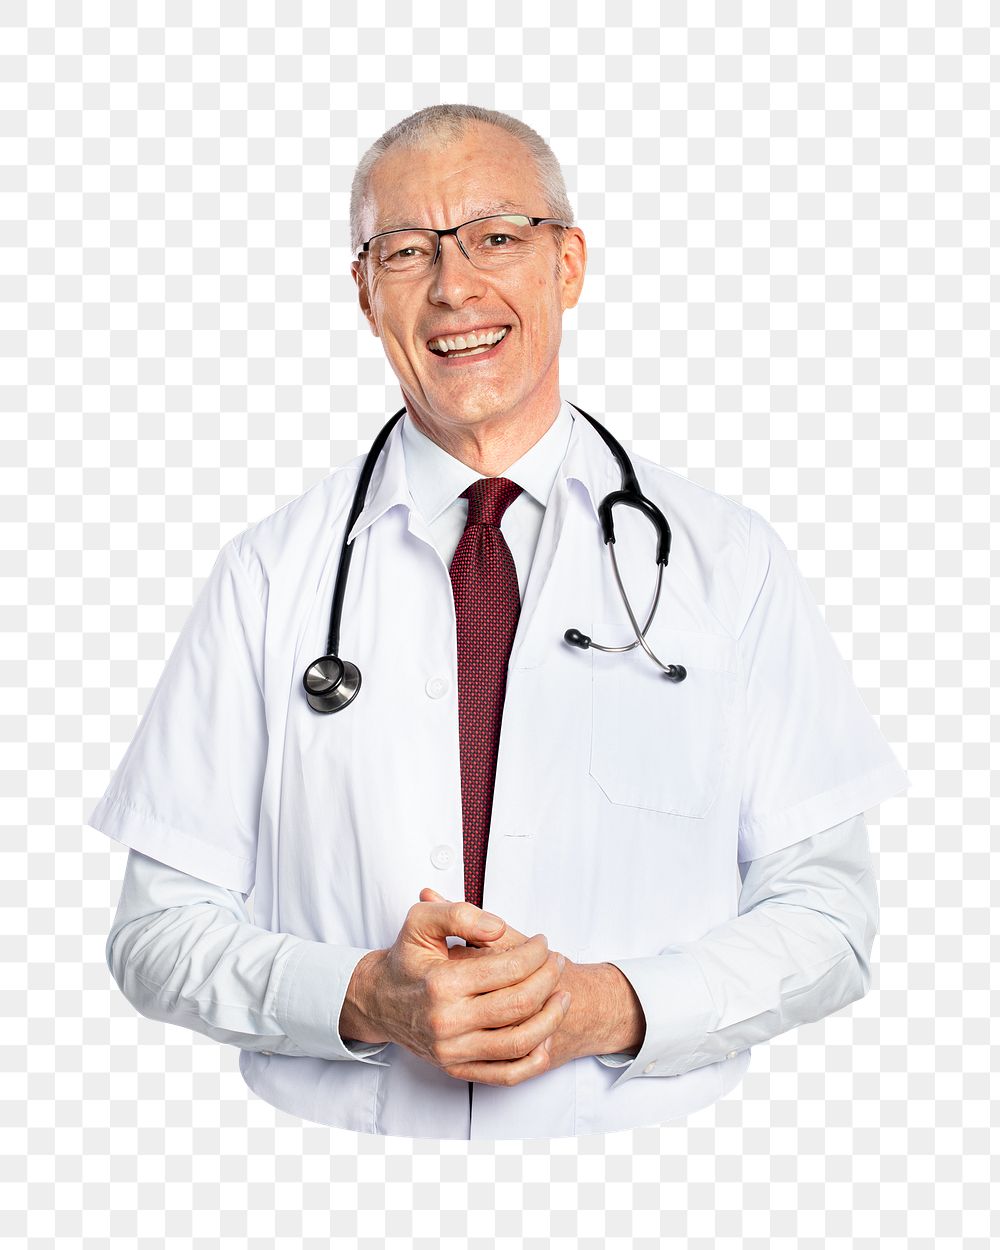 Cheerful doctor png sticker, transparent background